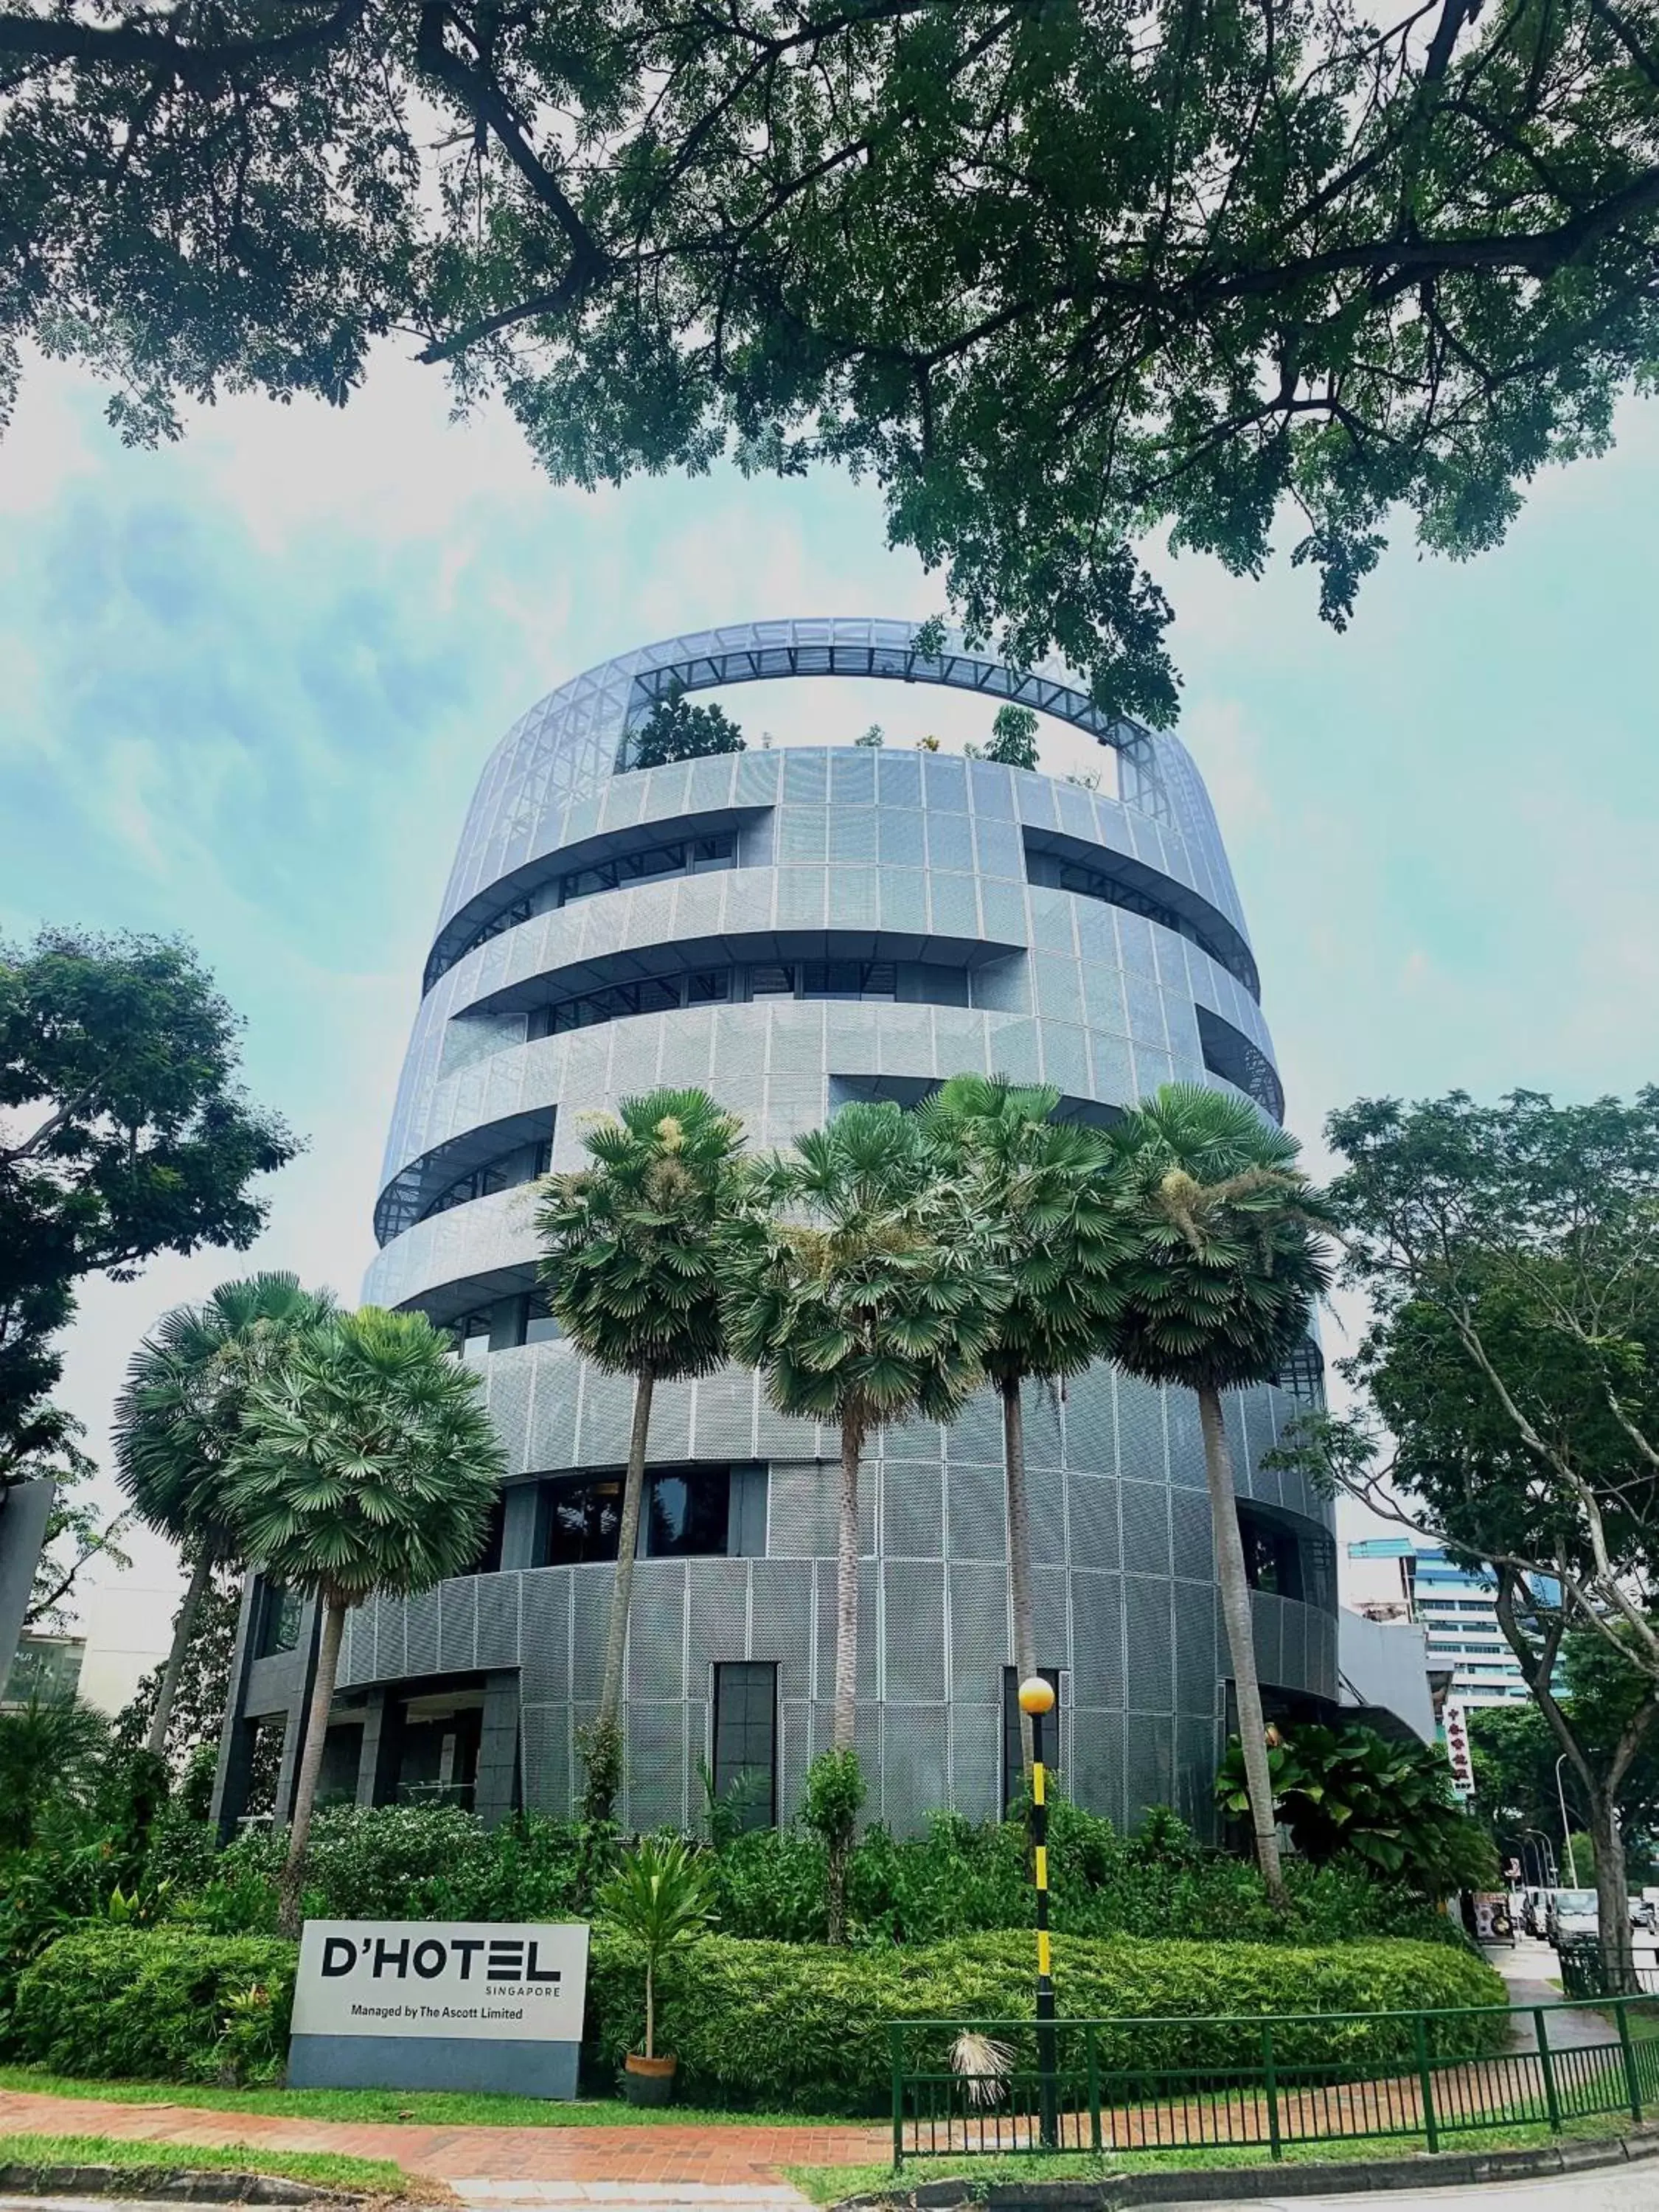 Property Building in D'Hotel Singapore managed by The Ascott Limited